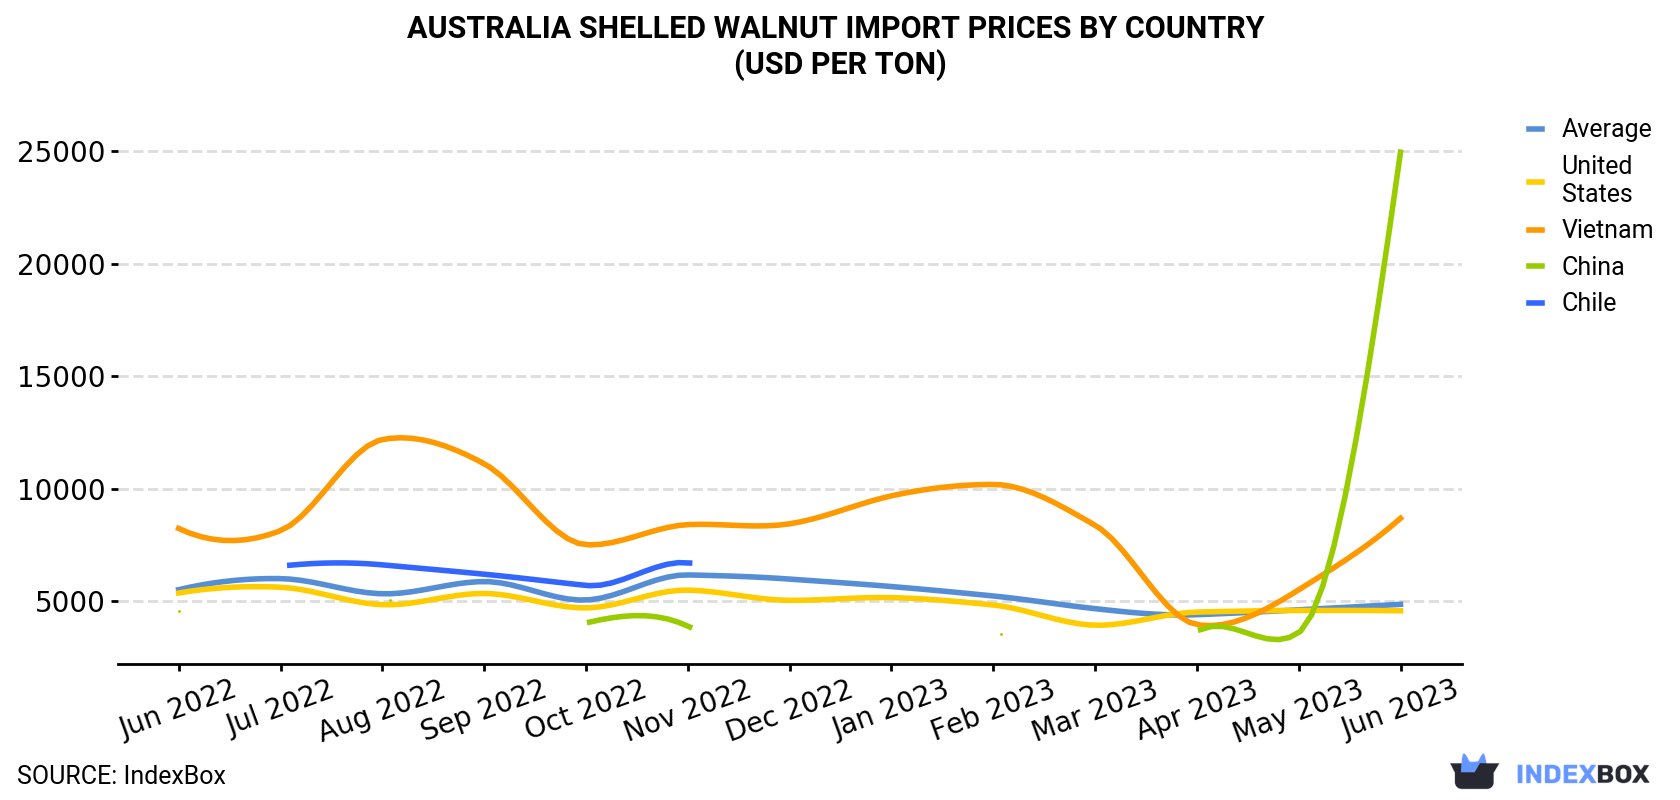 Australia Shelled Walnut Import Prices By Country (USD Per Ton)